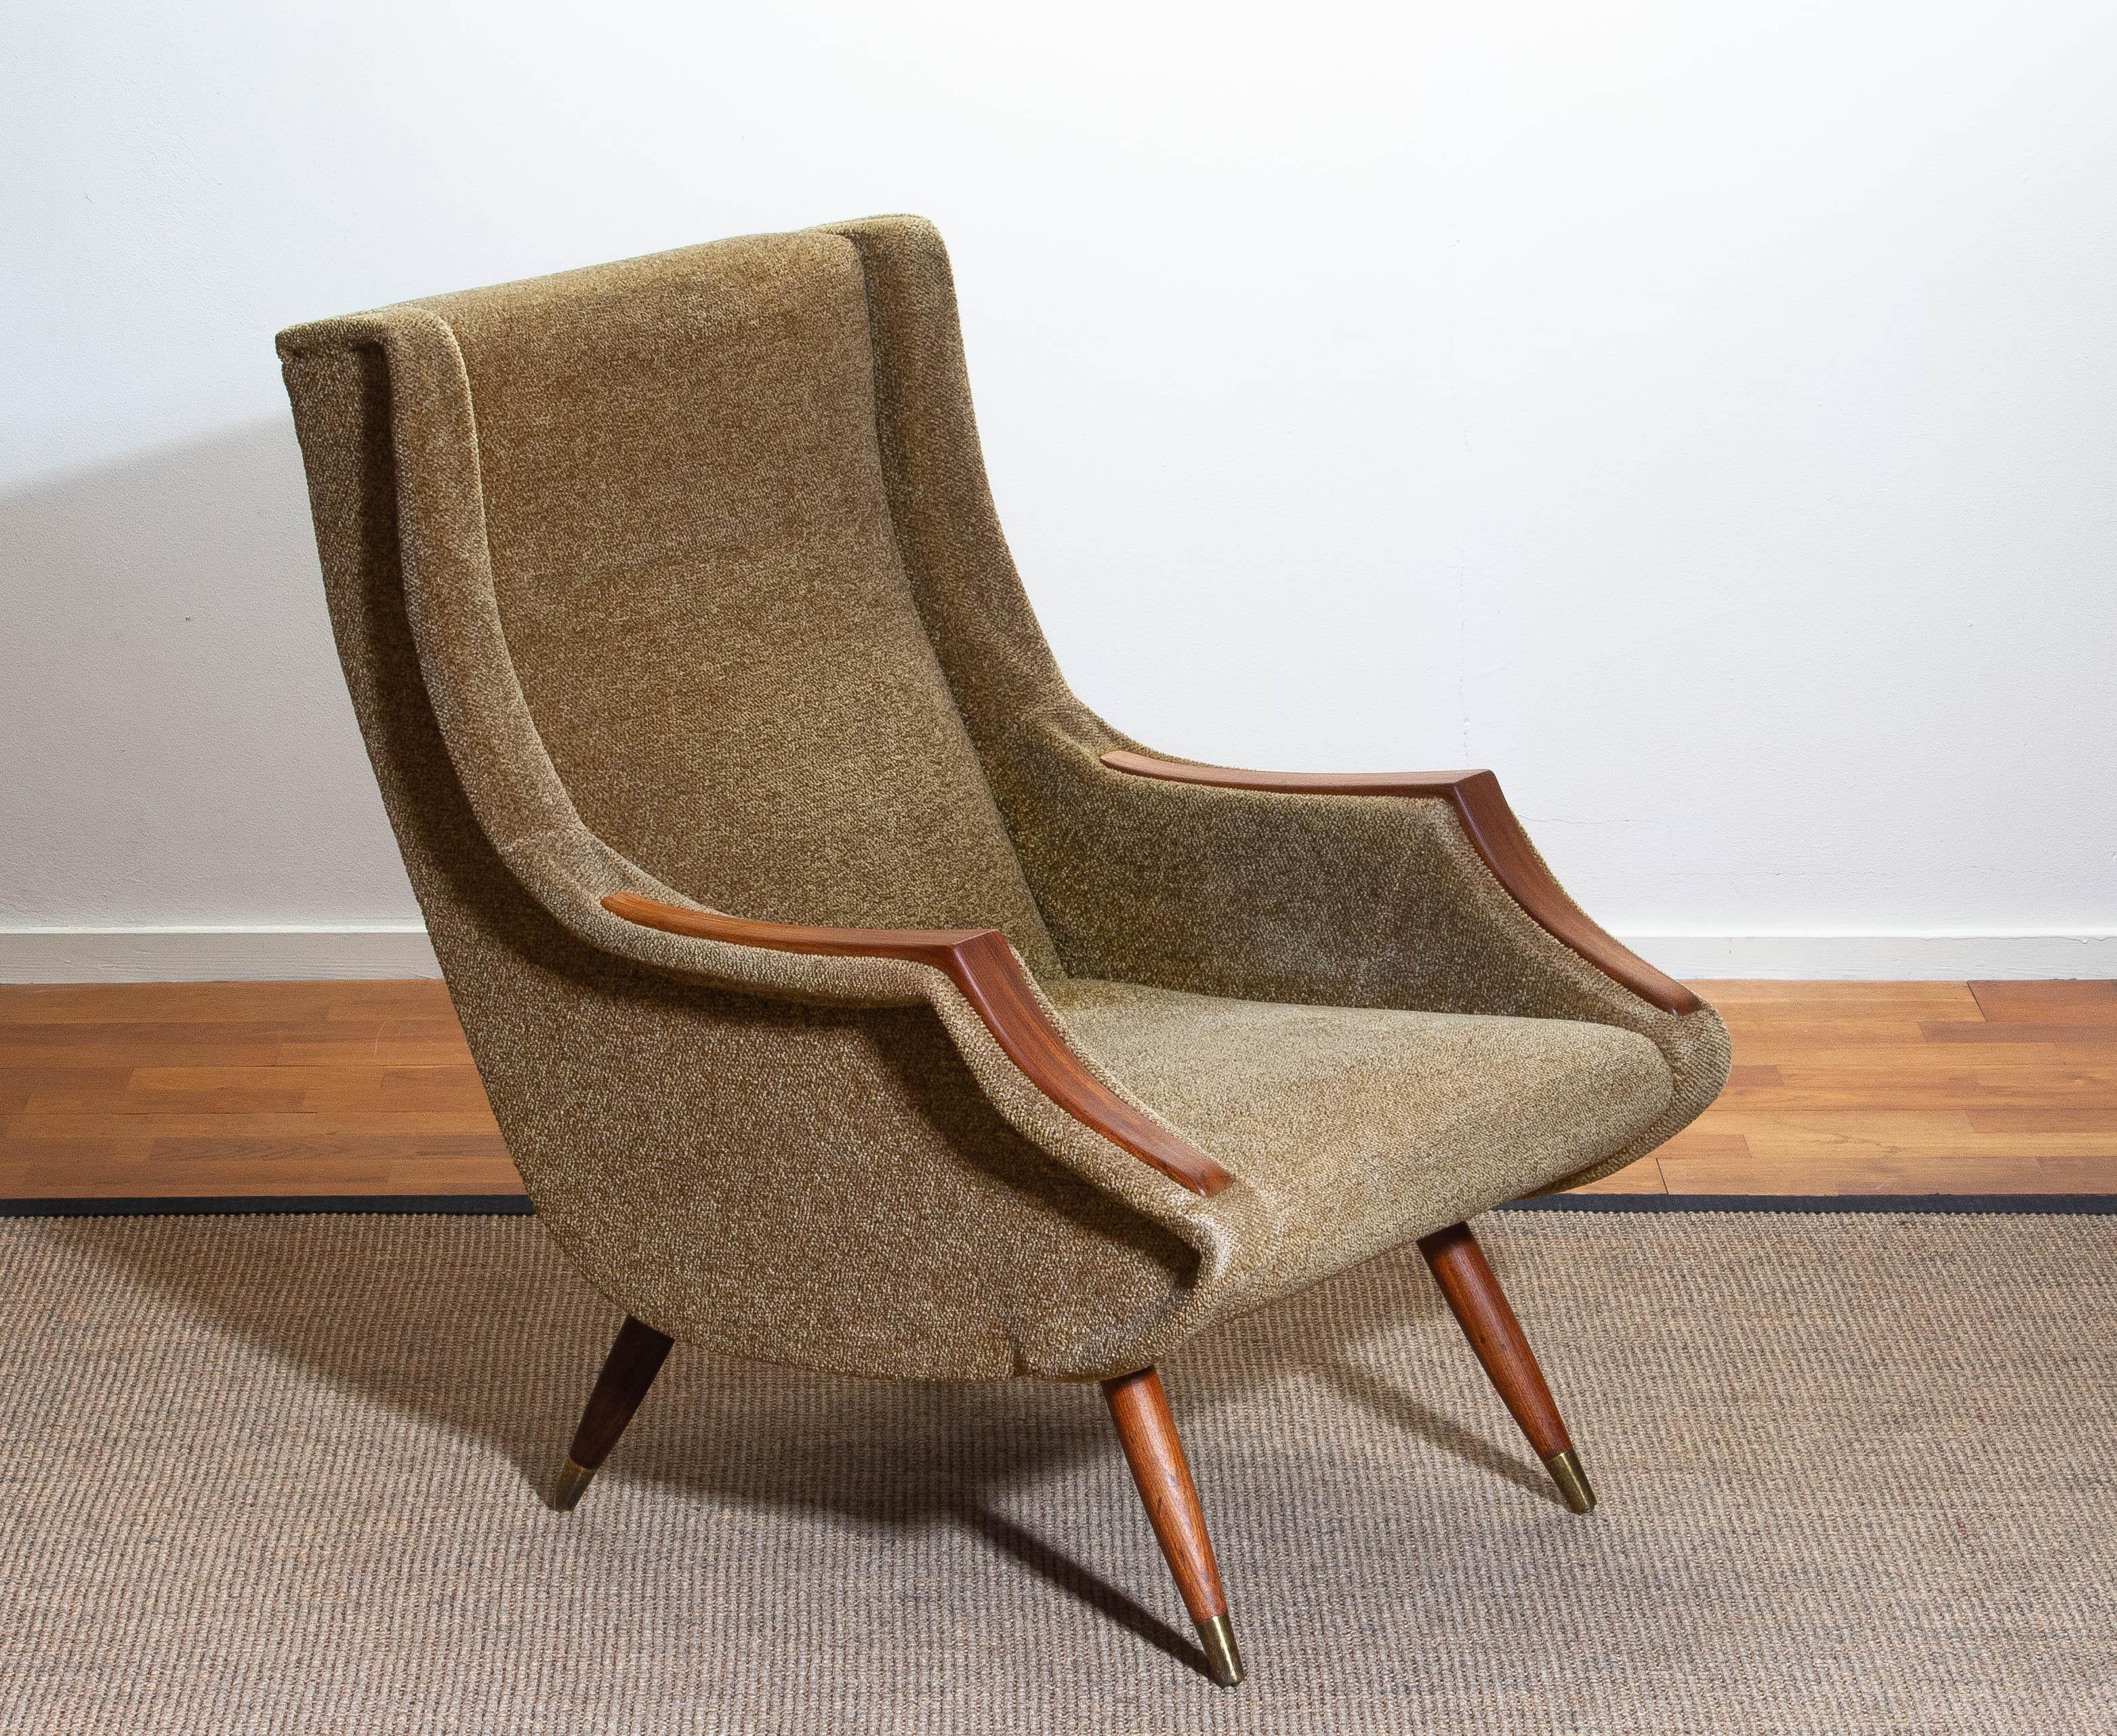 Mid-20th Century 1950s, Italian Lounge or Easy Chair by Aldo Morbelli for Isa Bergamo